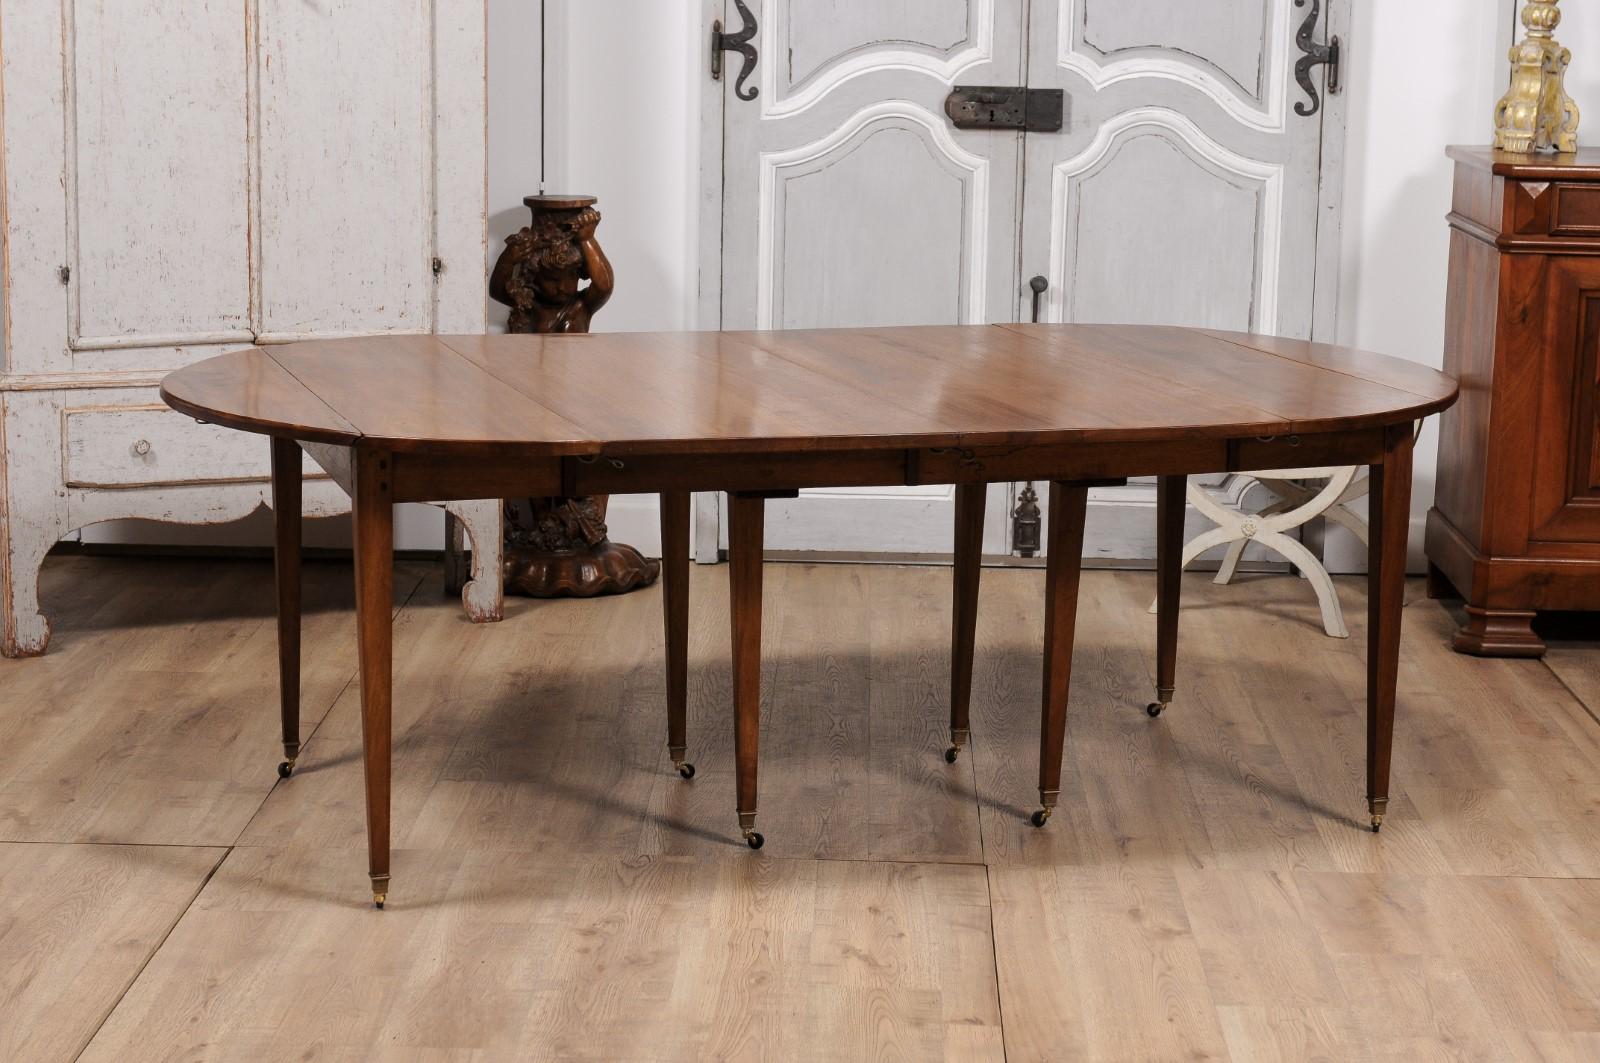 French Turn of the Century Extension Walnut Table With Five Leaves Circa 1900 For Sale 3